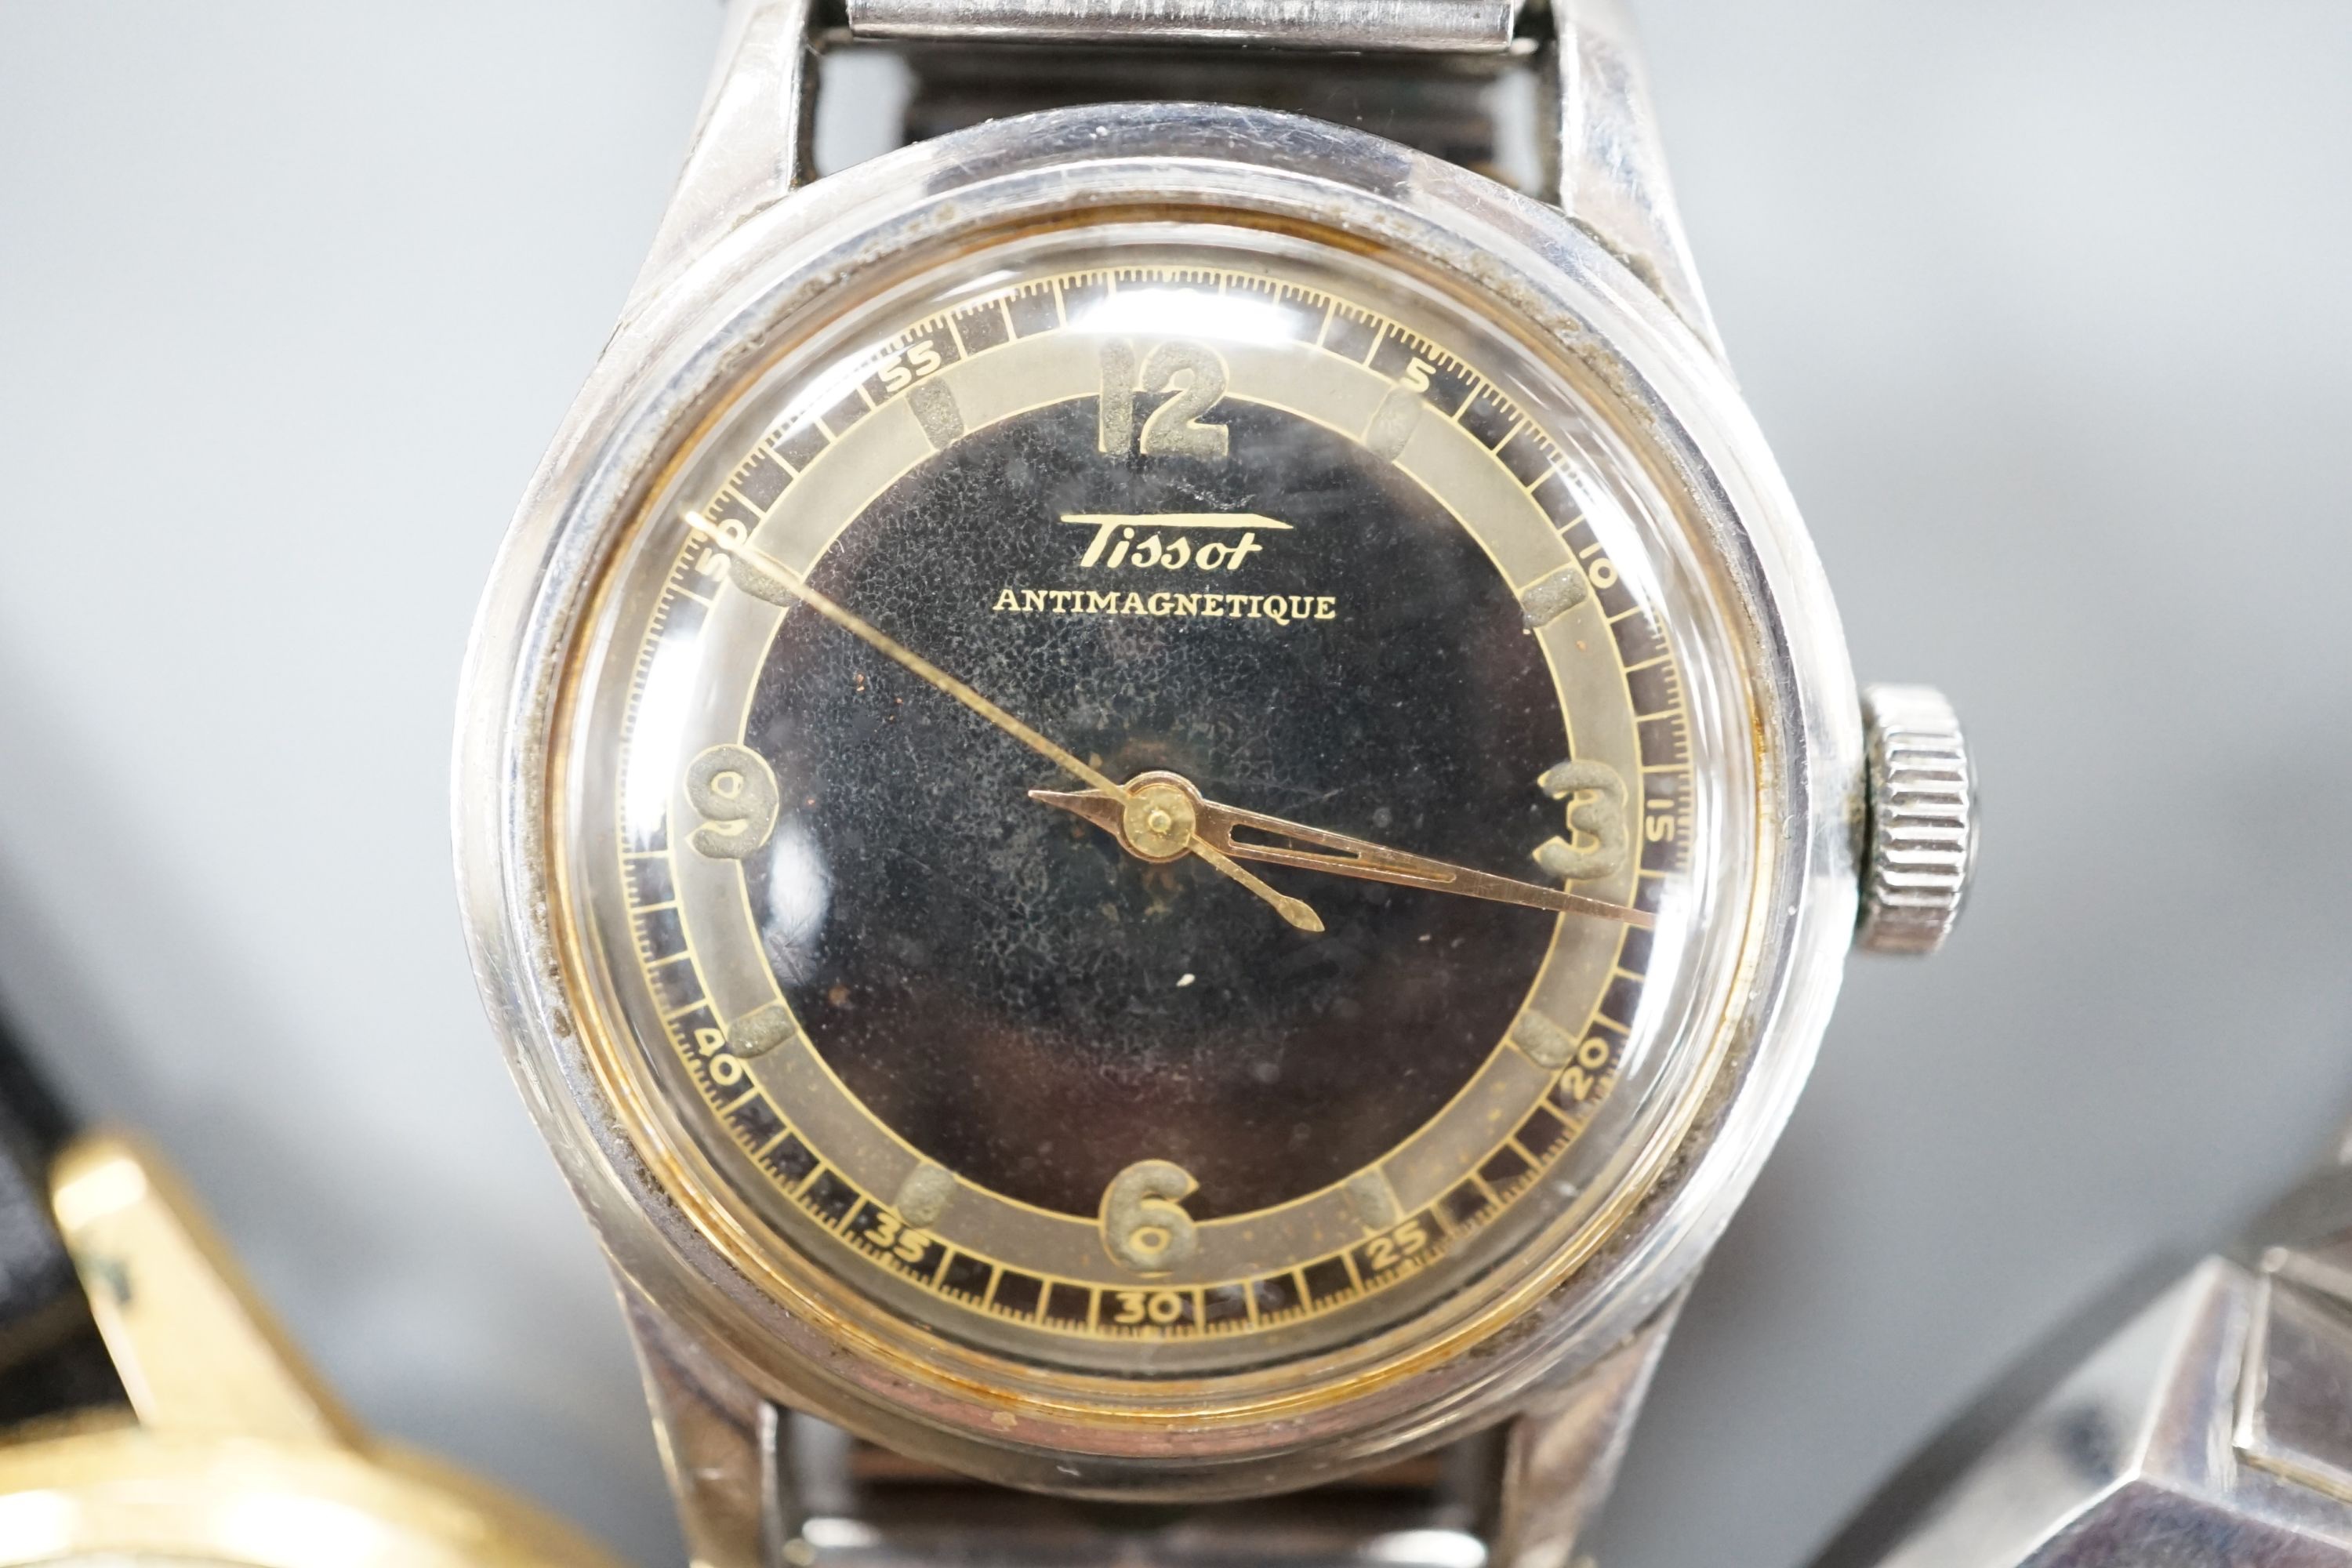 A gentleman's steel and gold plated Bucherer manual wind wrist watch, a steel Tissot watch and similar Seiko automatic watch.